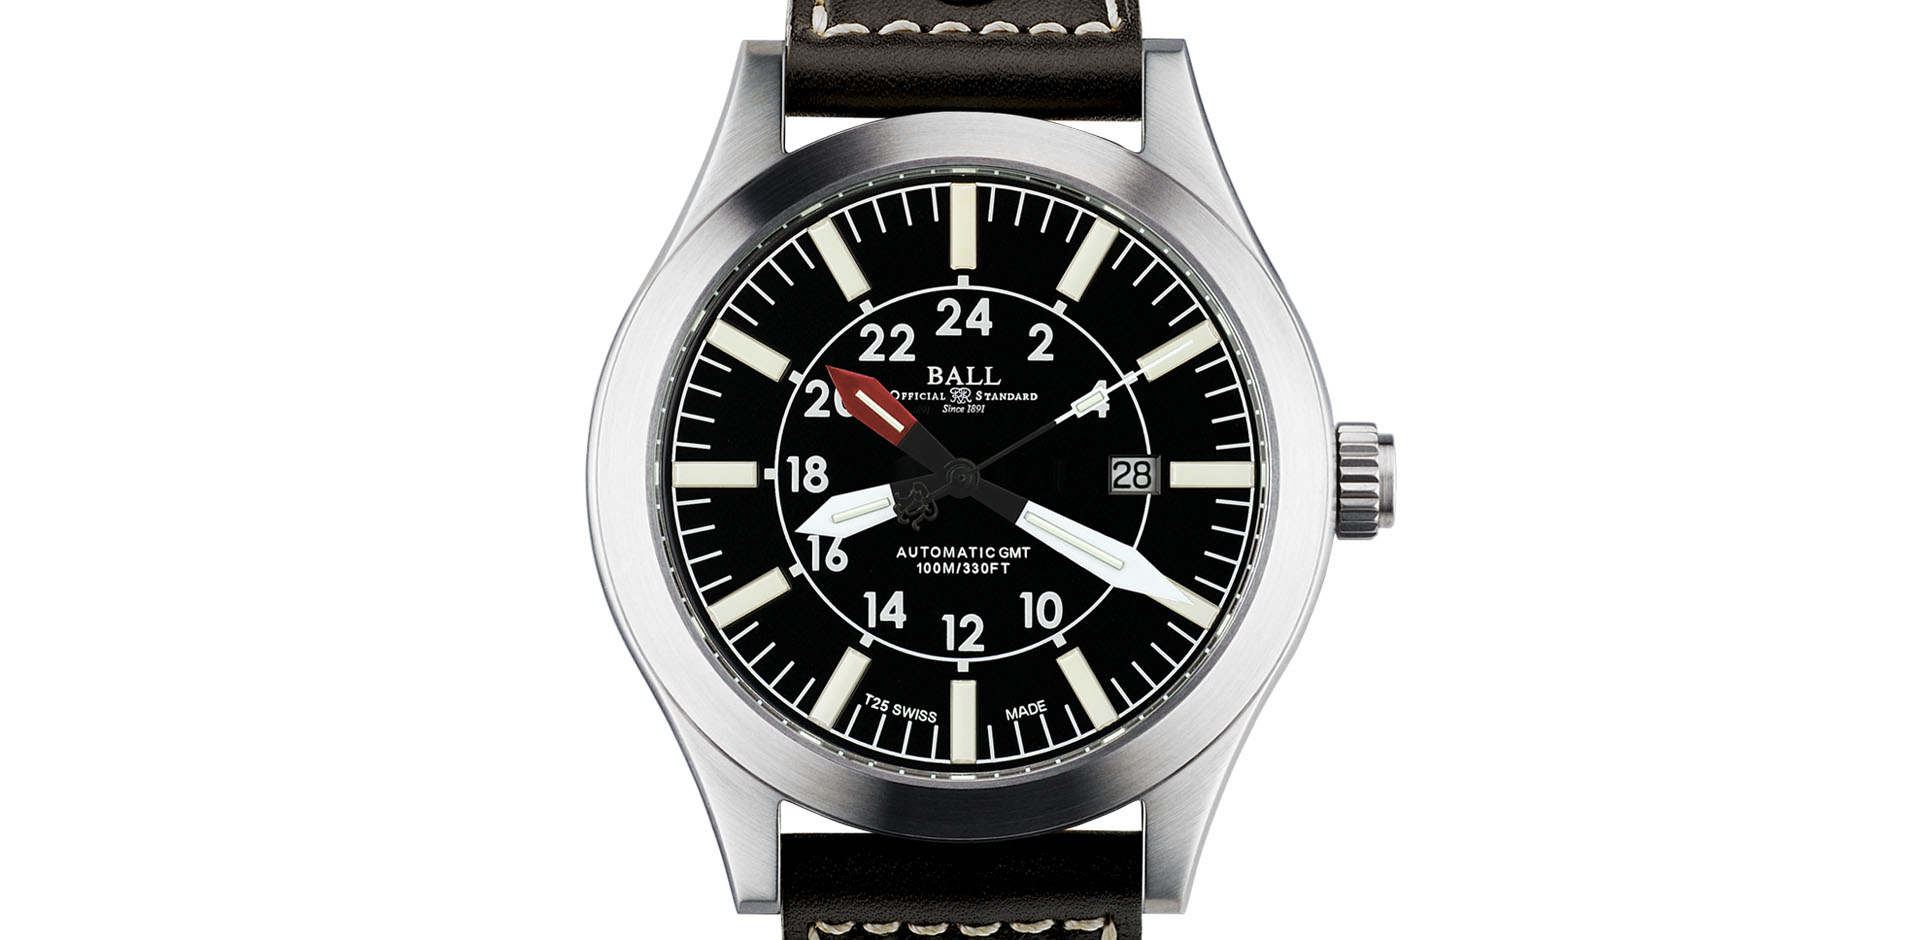 Welcome to BALL Watch - Aviator GMT